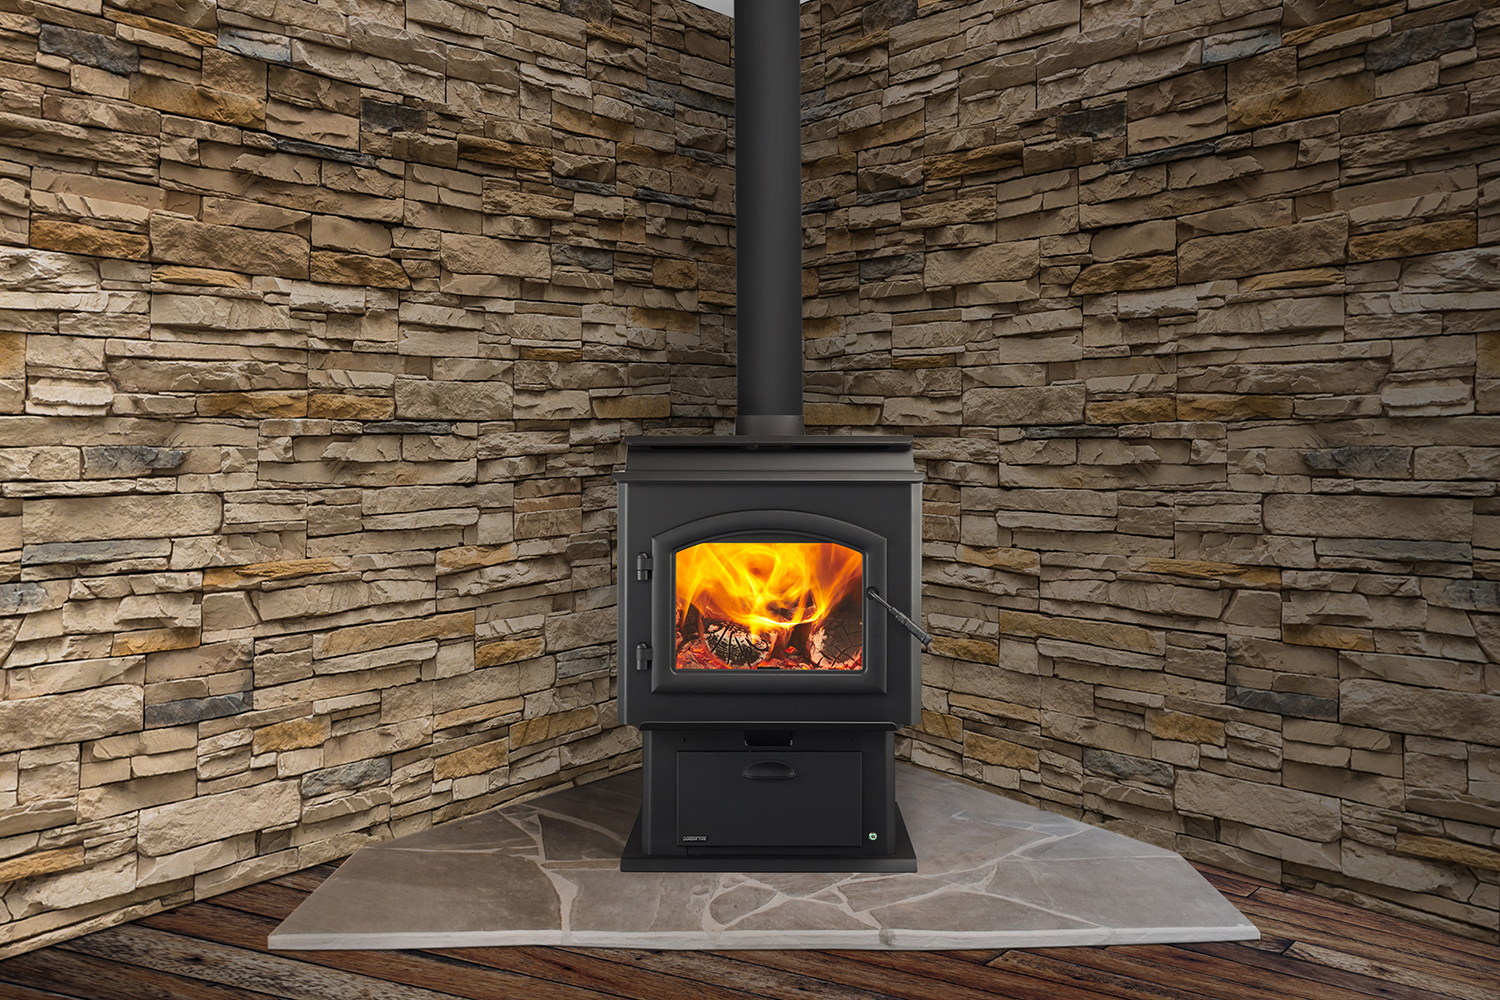 quadra fire introduces a thermostat controlled wood stove adventure series 001